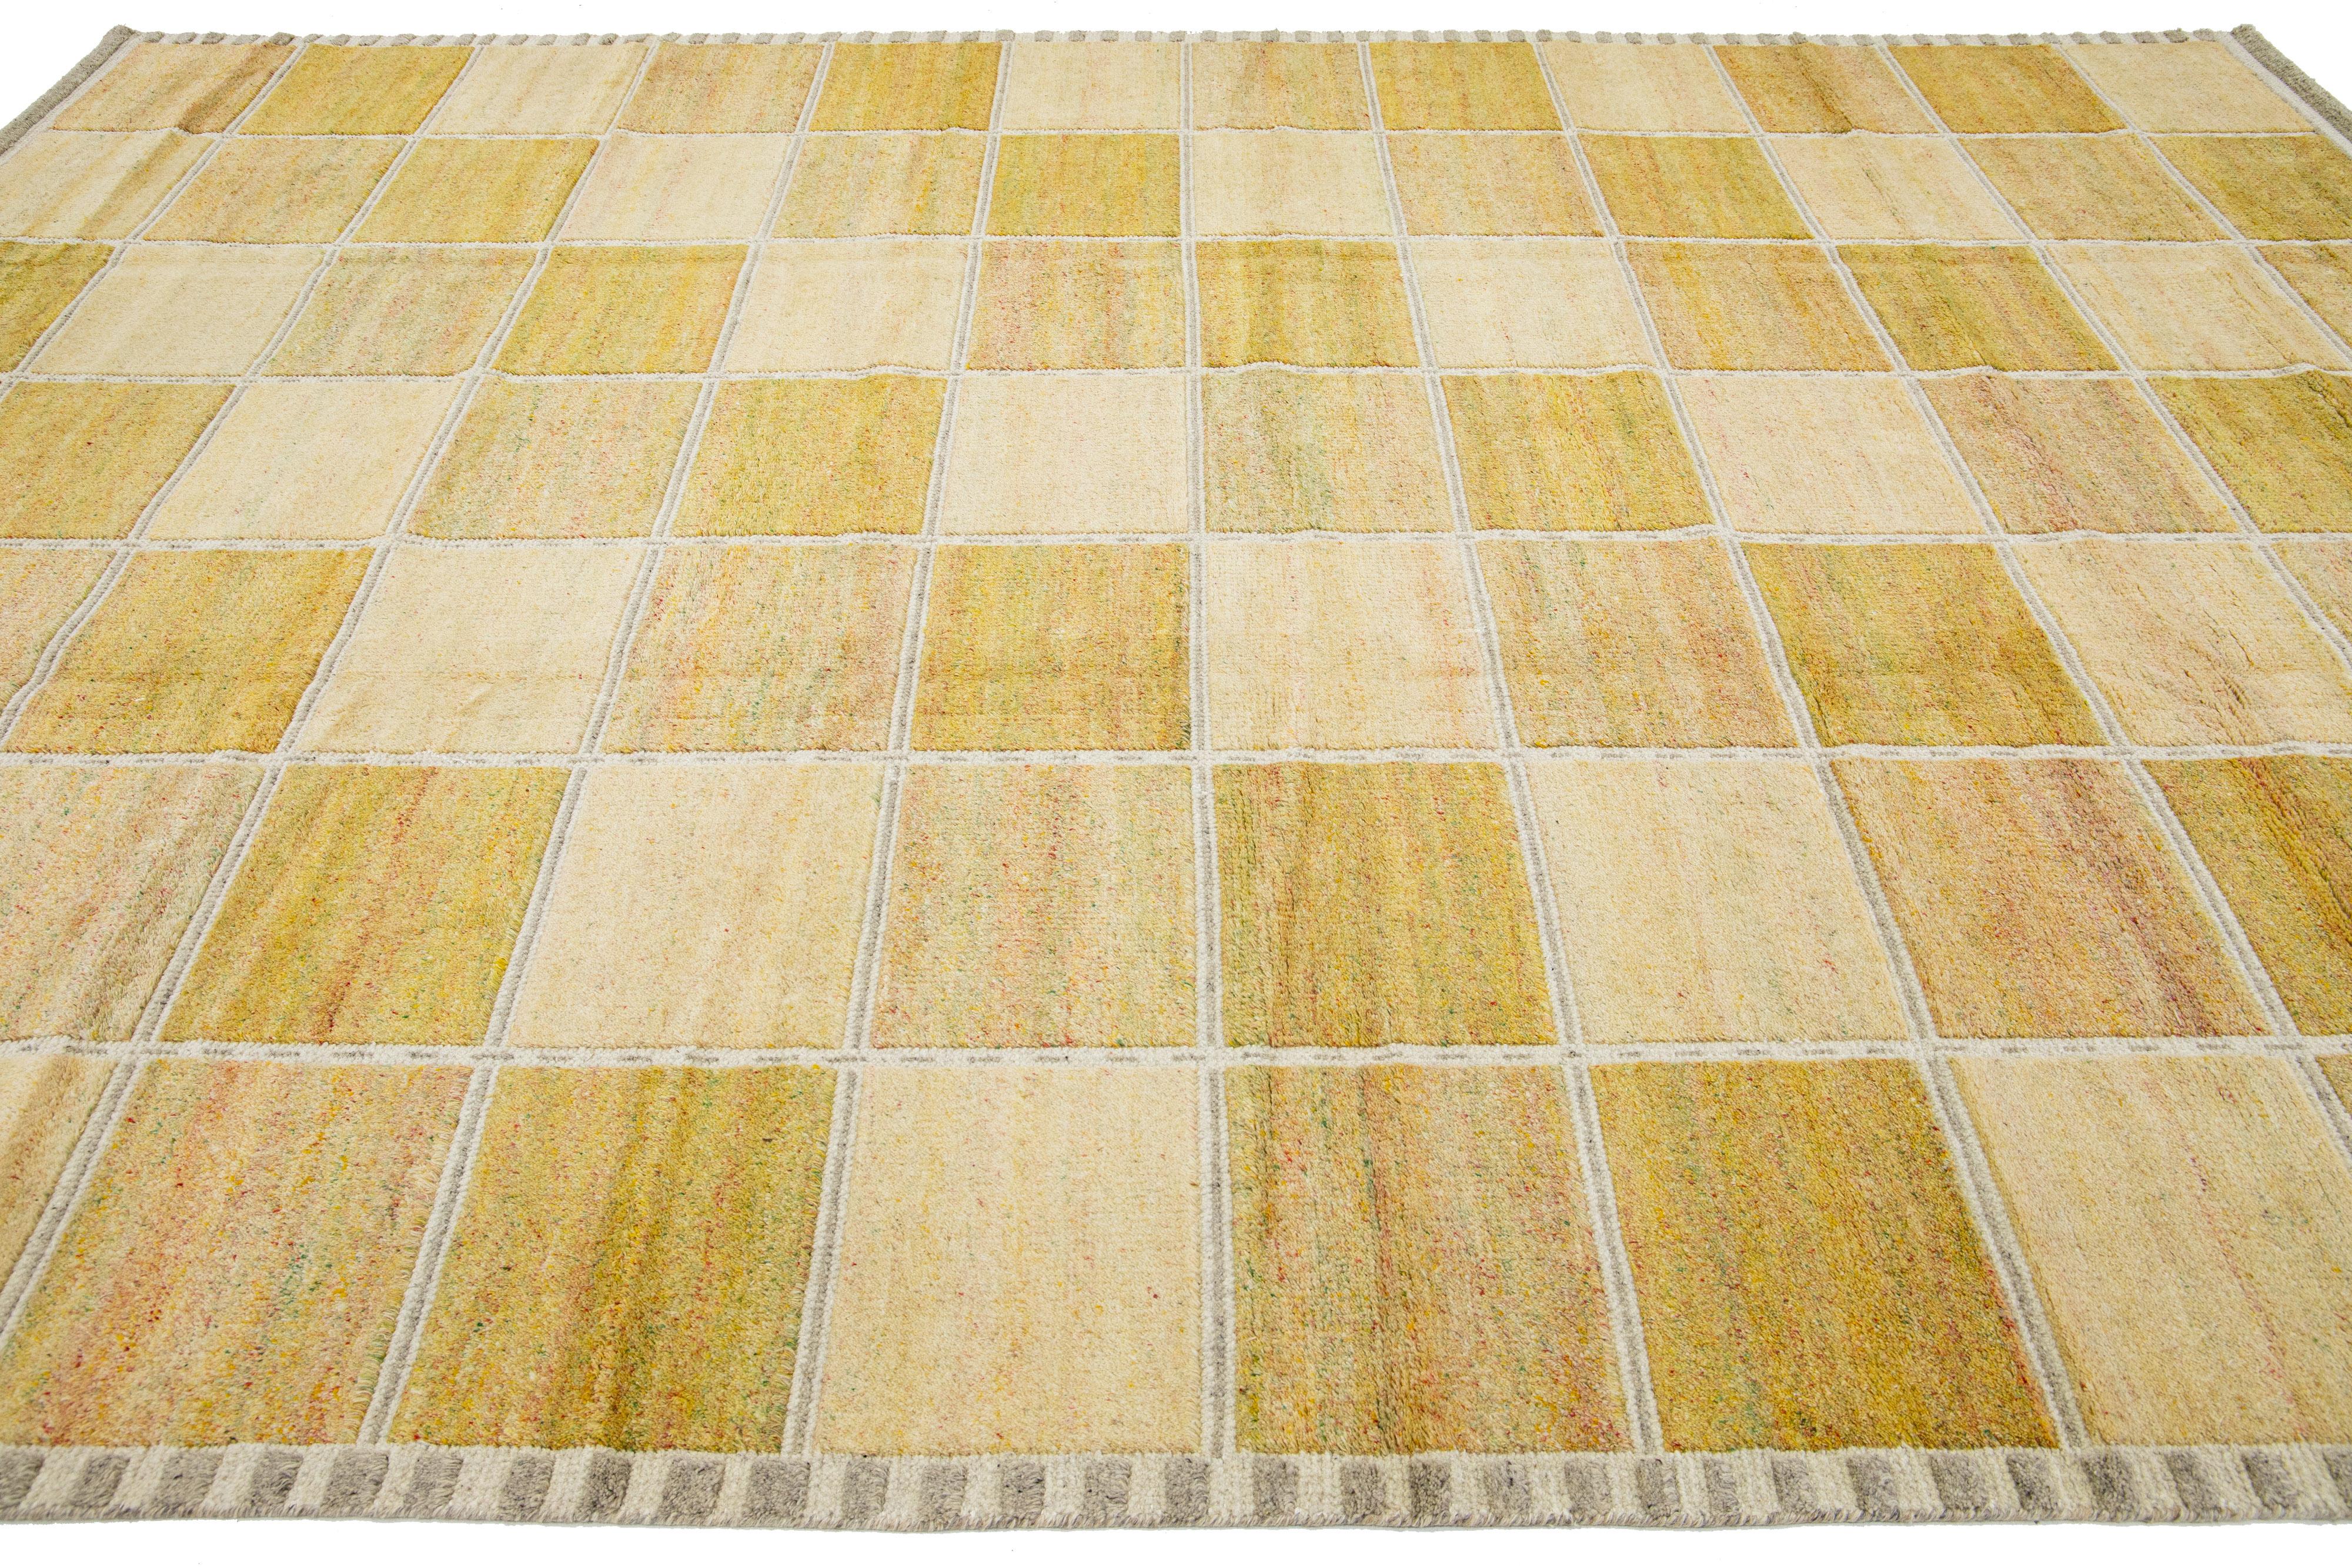 Hand-Knotted  High-low Contemporary Scandinavian Style Wool Rug In Yellow and Beige Tones For Sale